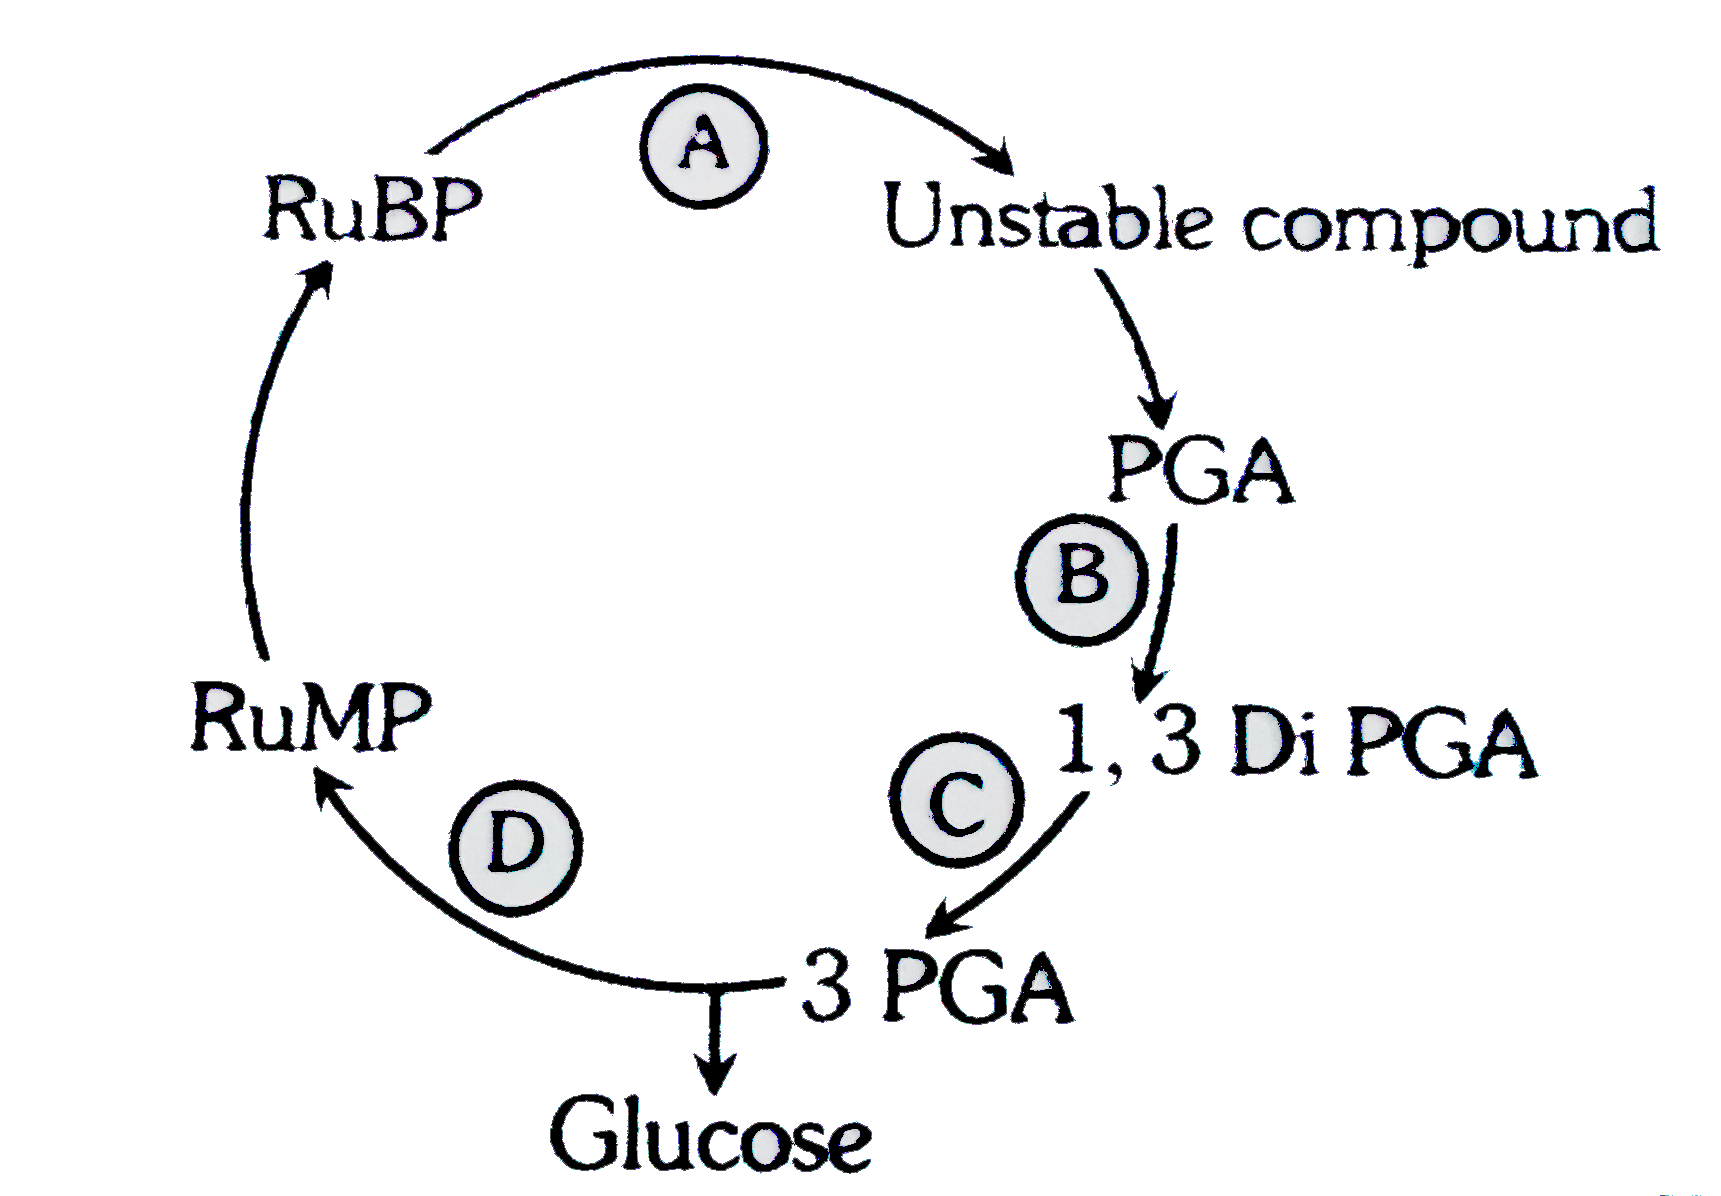 In a condensed schematic representation of drak reaction of photosynthesis gien below , steps are indicated by alphabets. Select the option where the alphabets are correctly identified